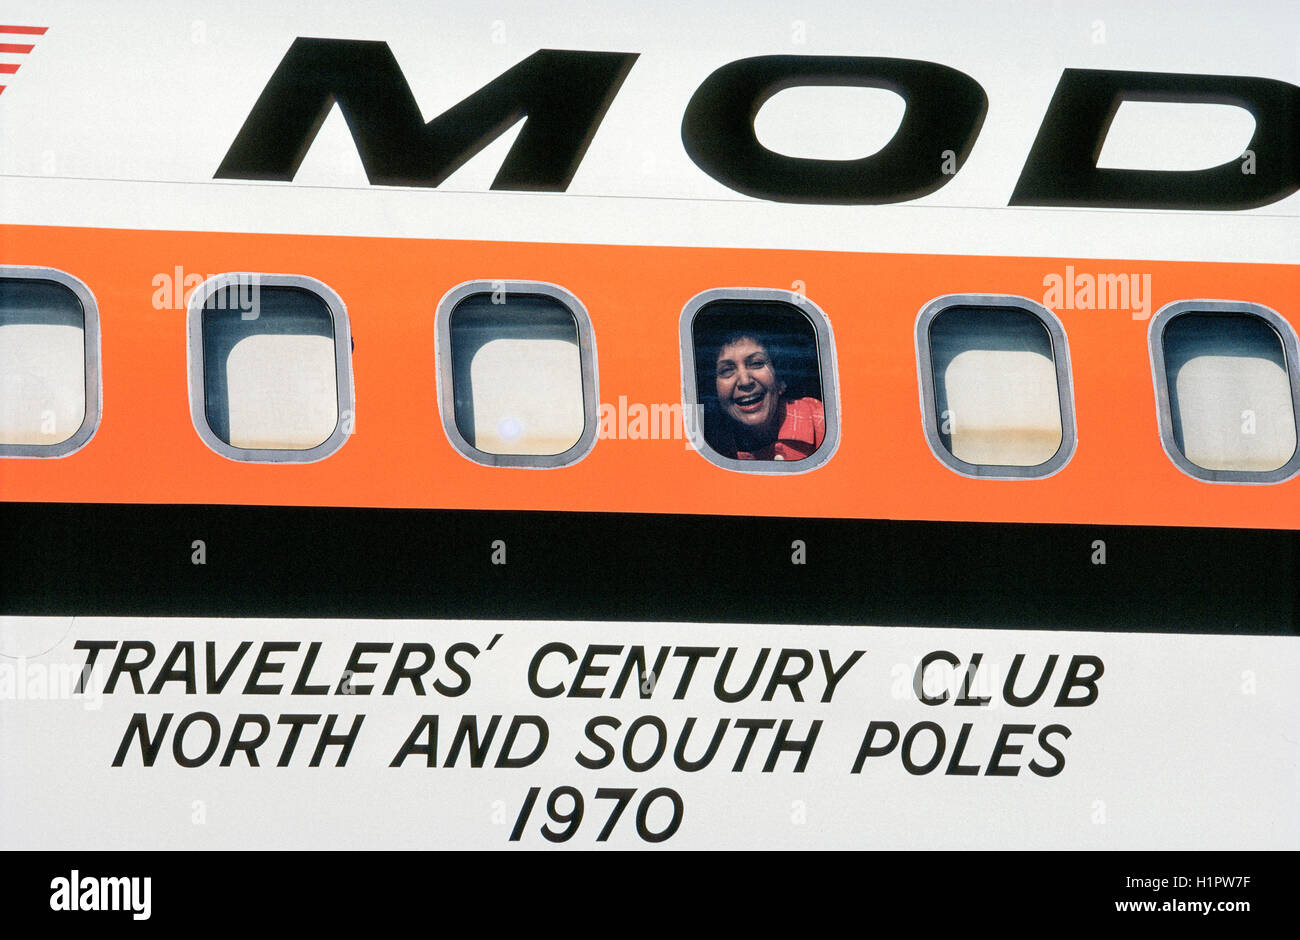 A passenger looks out the window of a Convair 990 jet that was a Modern Air Transport charter called 'Polar Bird II.'  The plane carried 48 passengers via the North Pole and South Pole on a unique 32-day around-the-world tour organized by Hemphill World Air Cruises of Los Angeles, California, for the Travelers' Century Club. It was the most expensive world tour of the time (1970) at $9,760 per person. Stock Photo